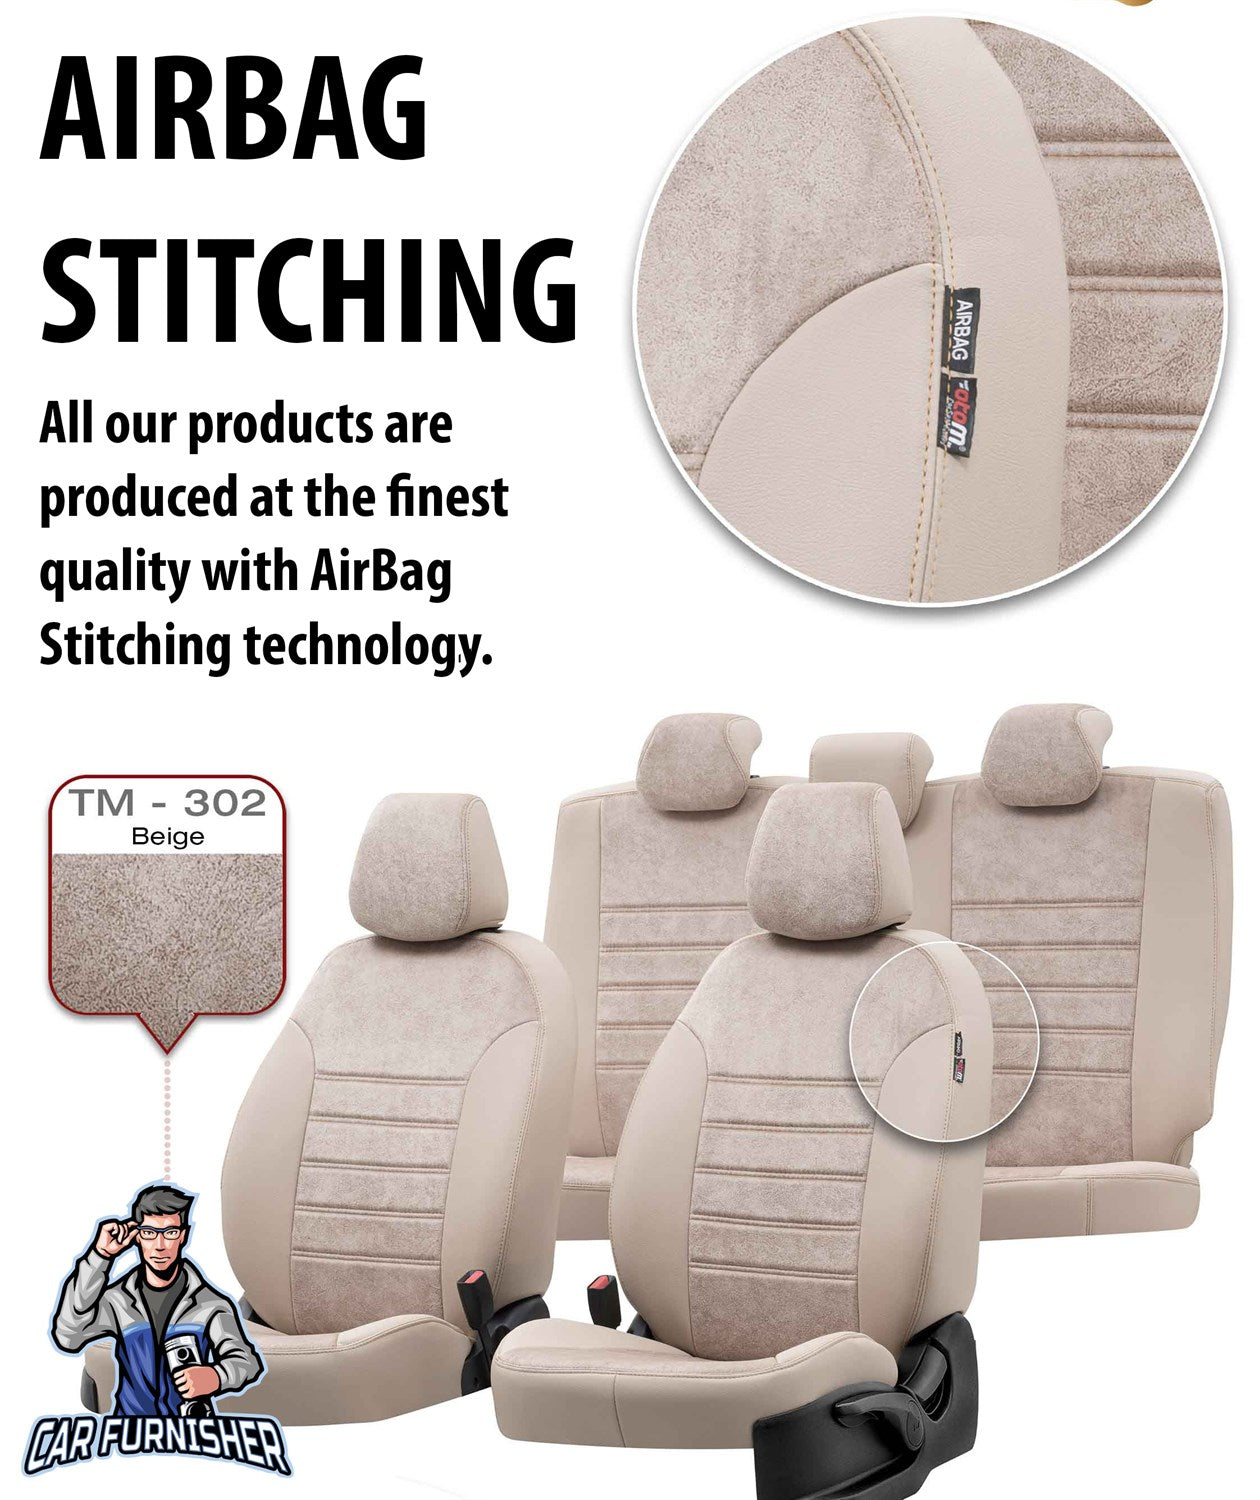 Dacia Lodgy Seat Covers Milano Suede Design Black Leather & Suede Fabric